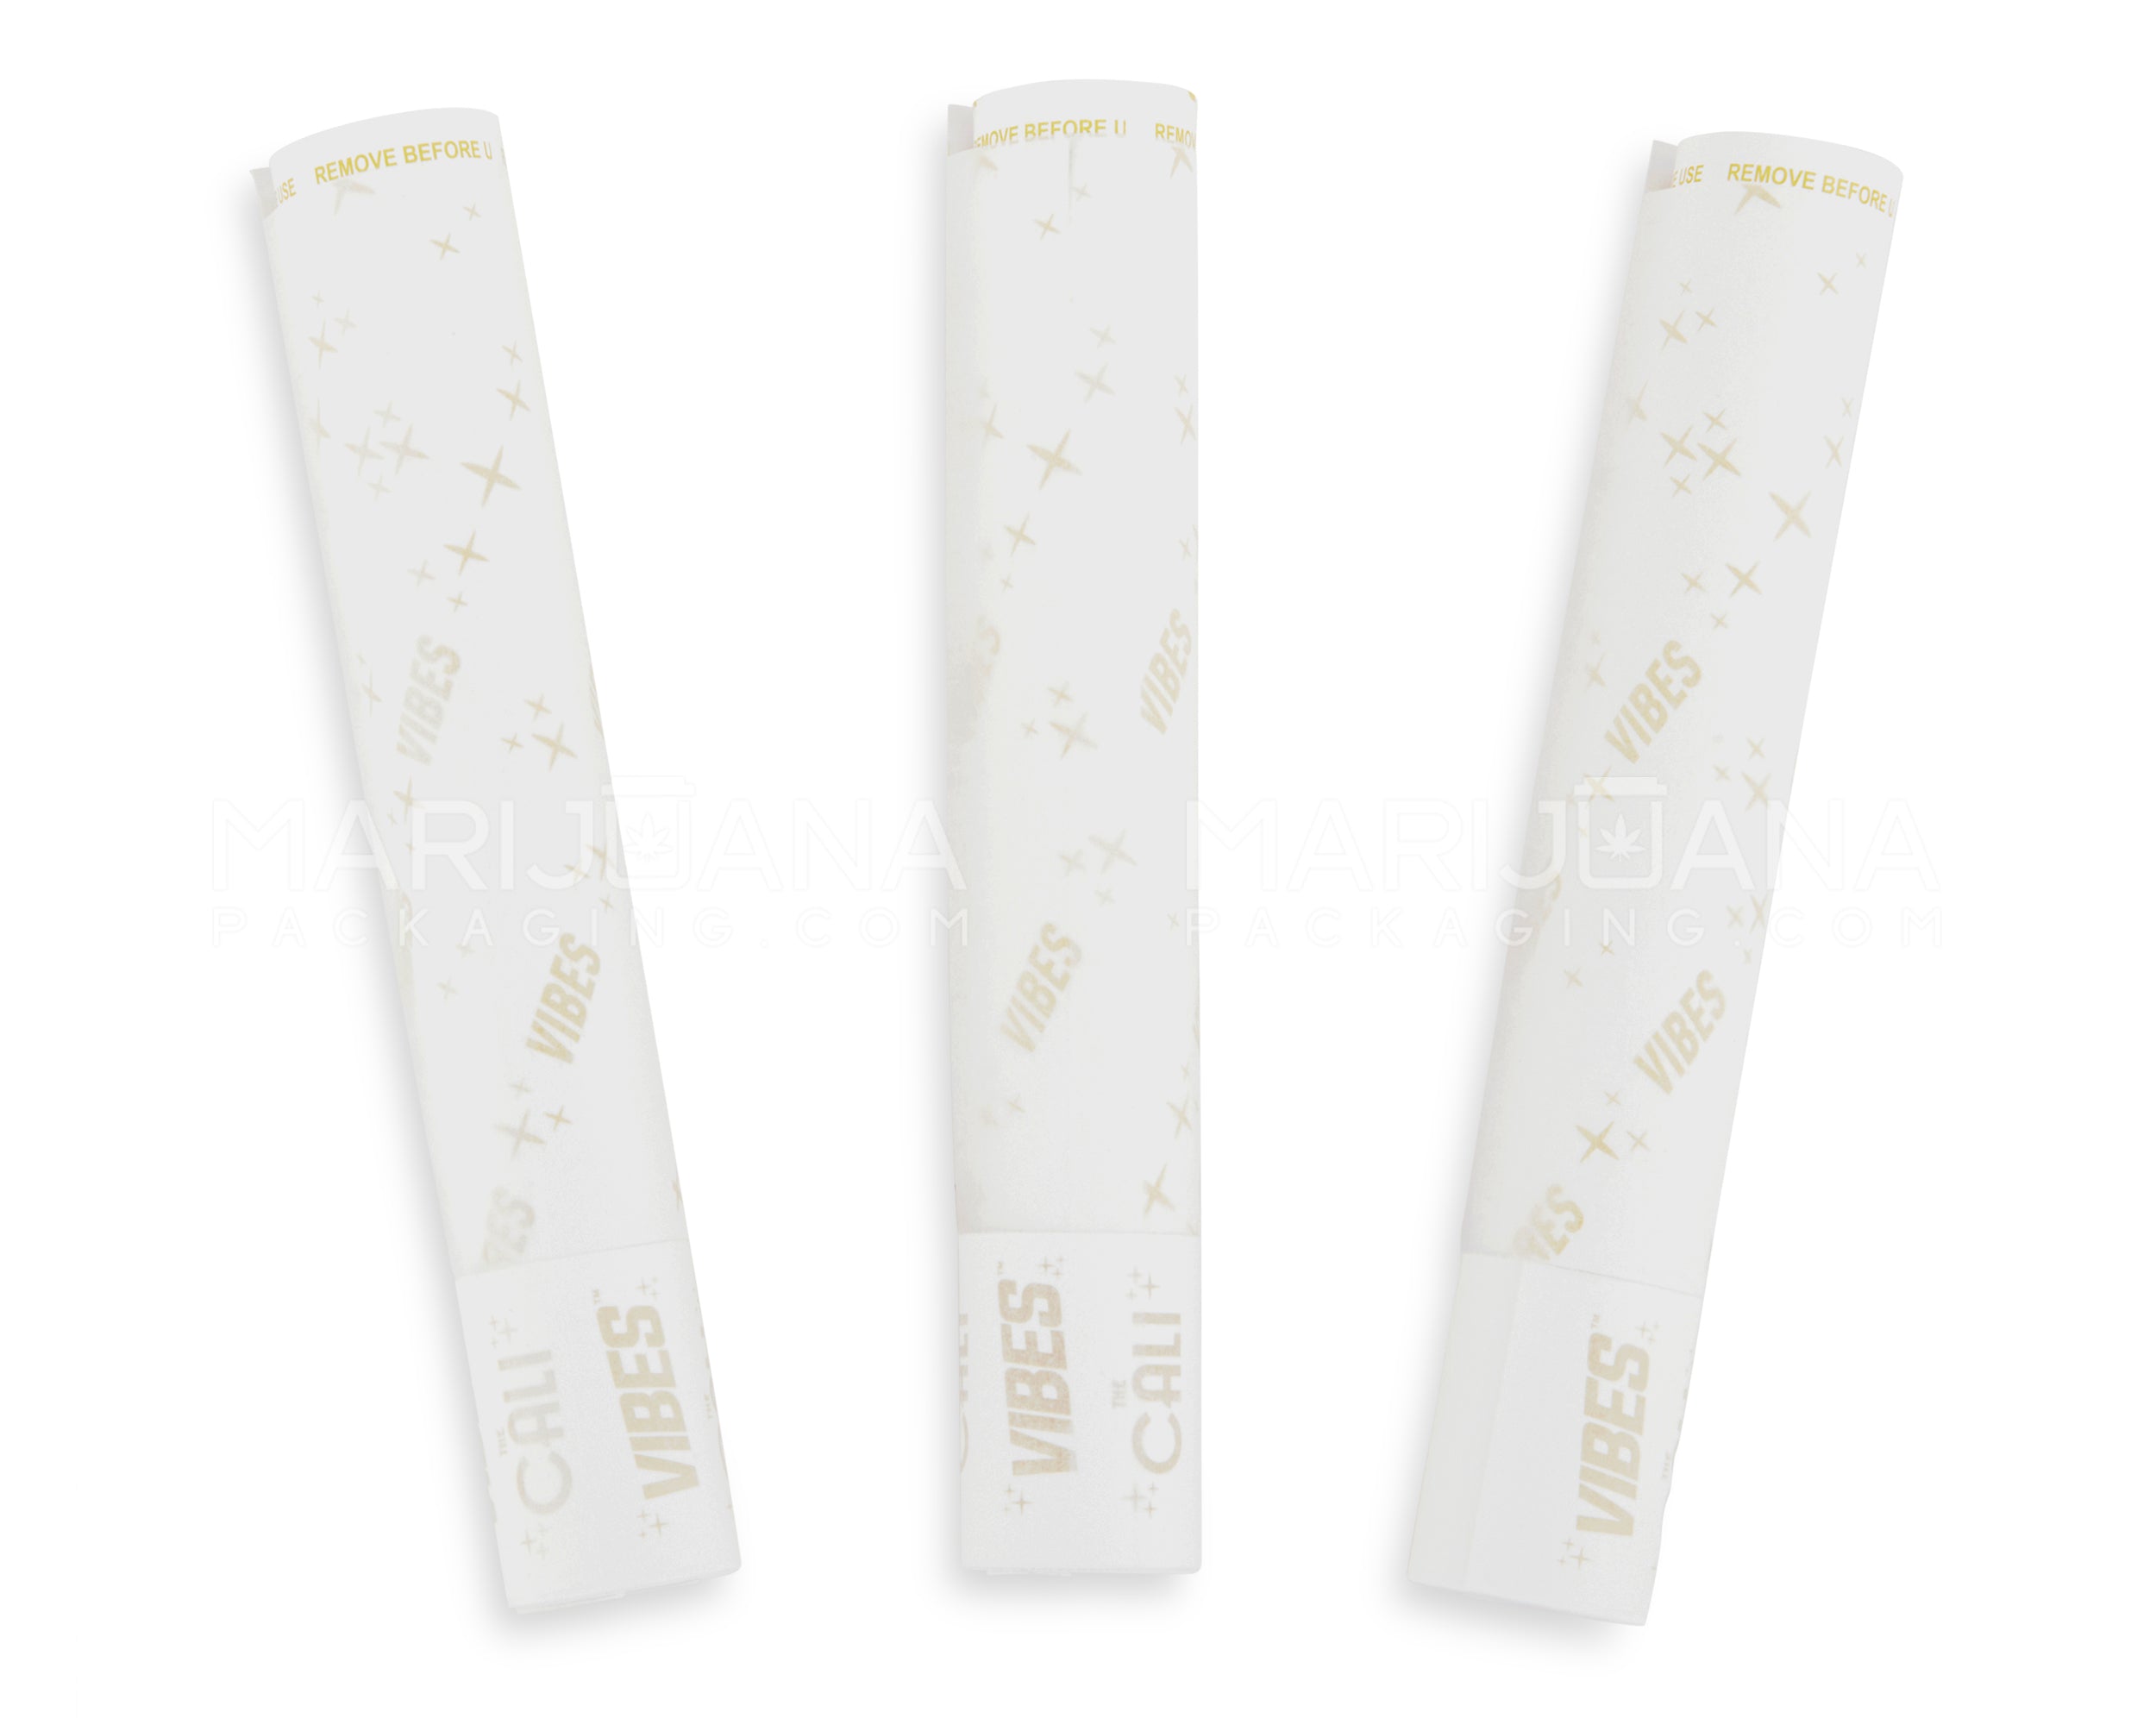 VIBES | 'Retail Display' The Cali 3 Gram Pre-Rolled Cones | 110mm - Hemp Paper - 24 Count - 5